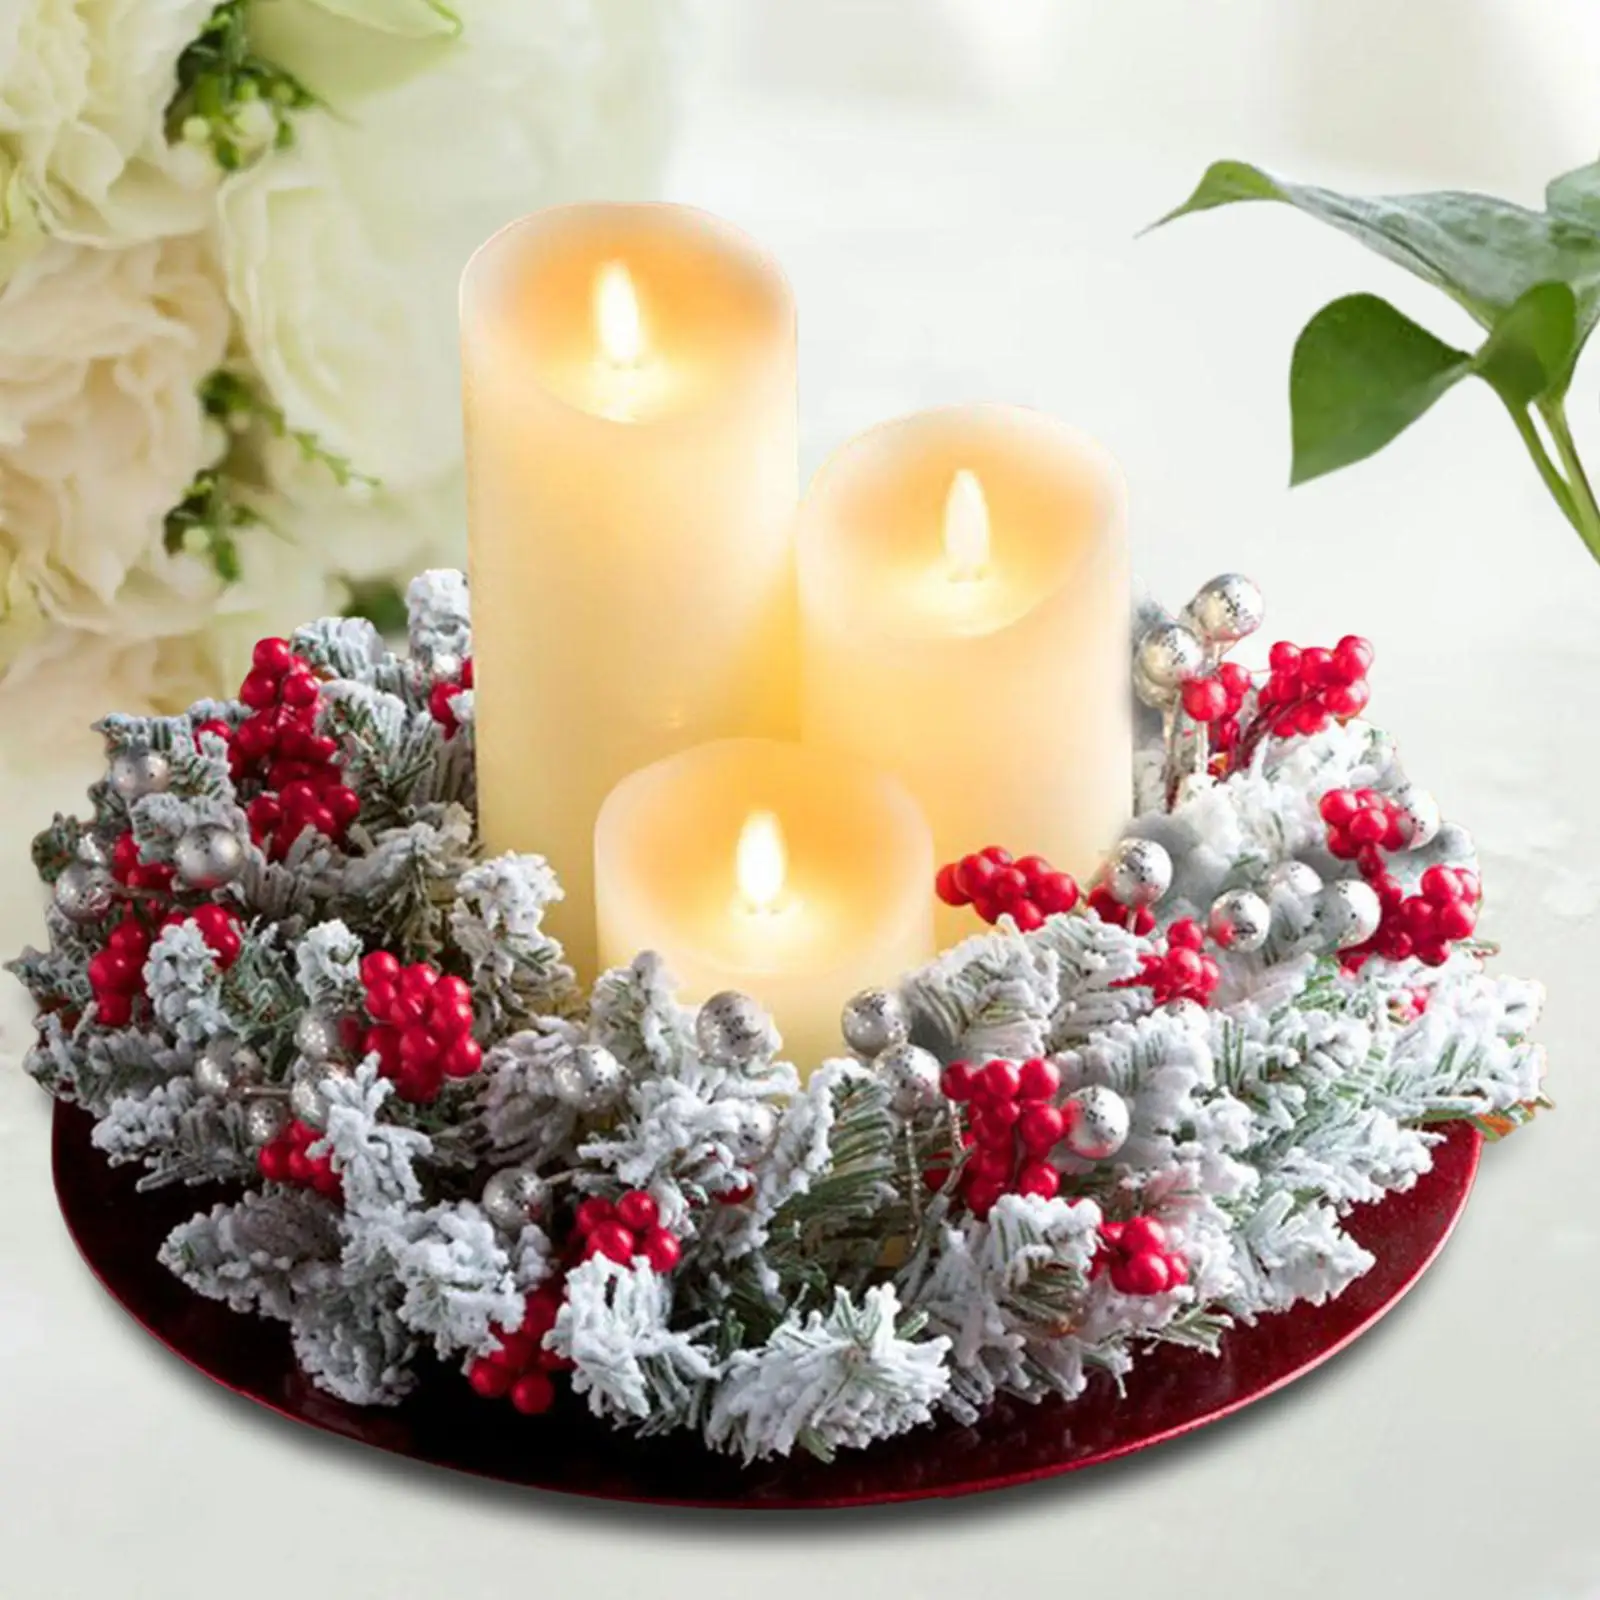 Candle Rings Candles Pillar Creative Candlestick Decorative Rustic Garland Wreath for Dining Table Living Room Parties Home Door